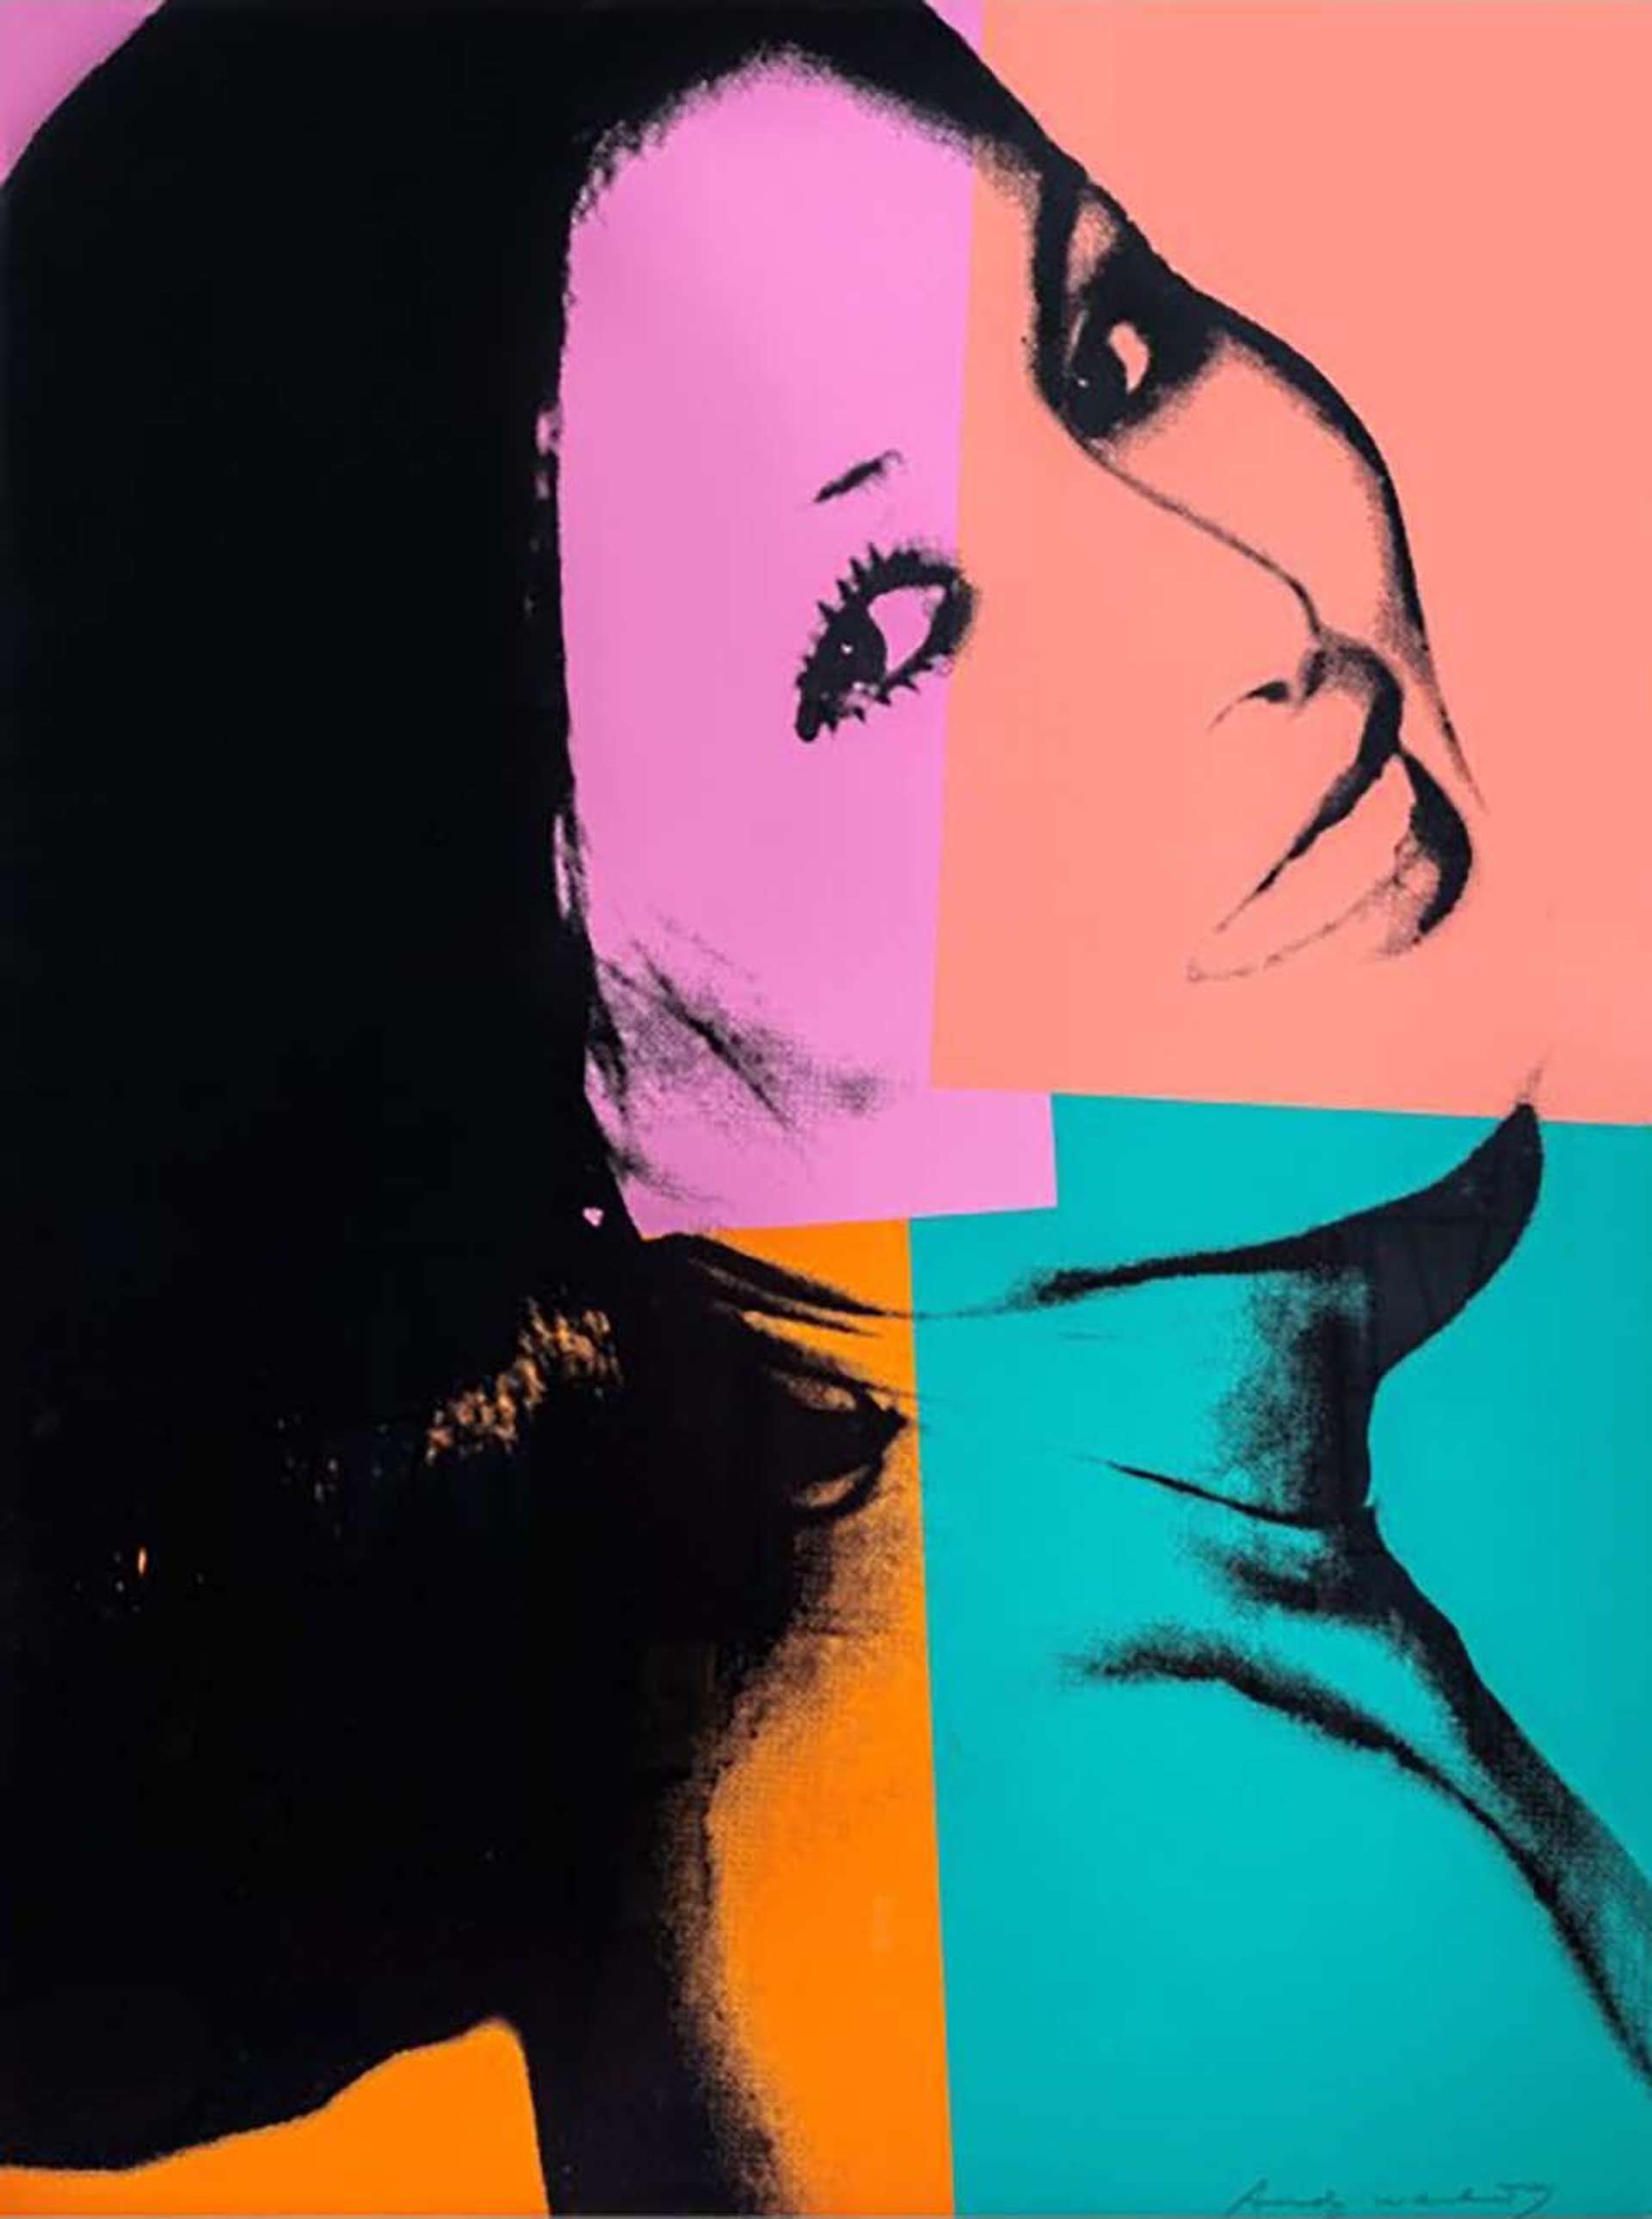 The Pop art movement – why we still love the posters